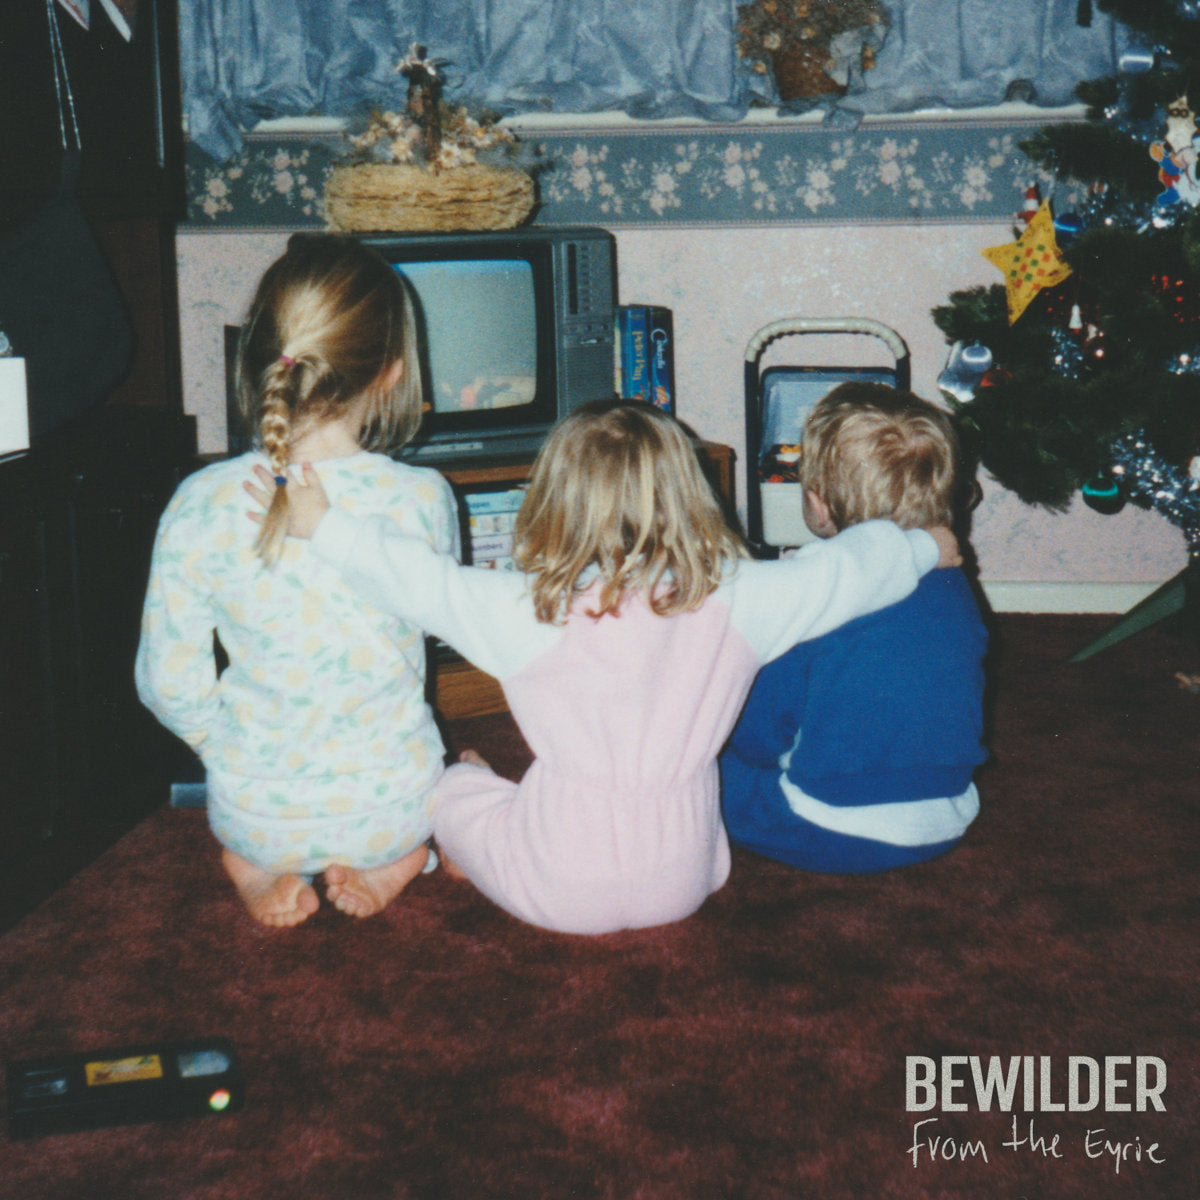 Bewilder "From the Eyrie" LP